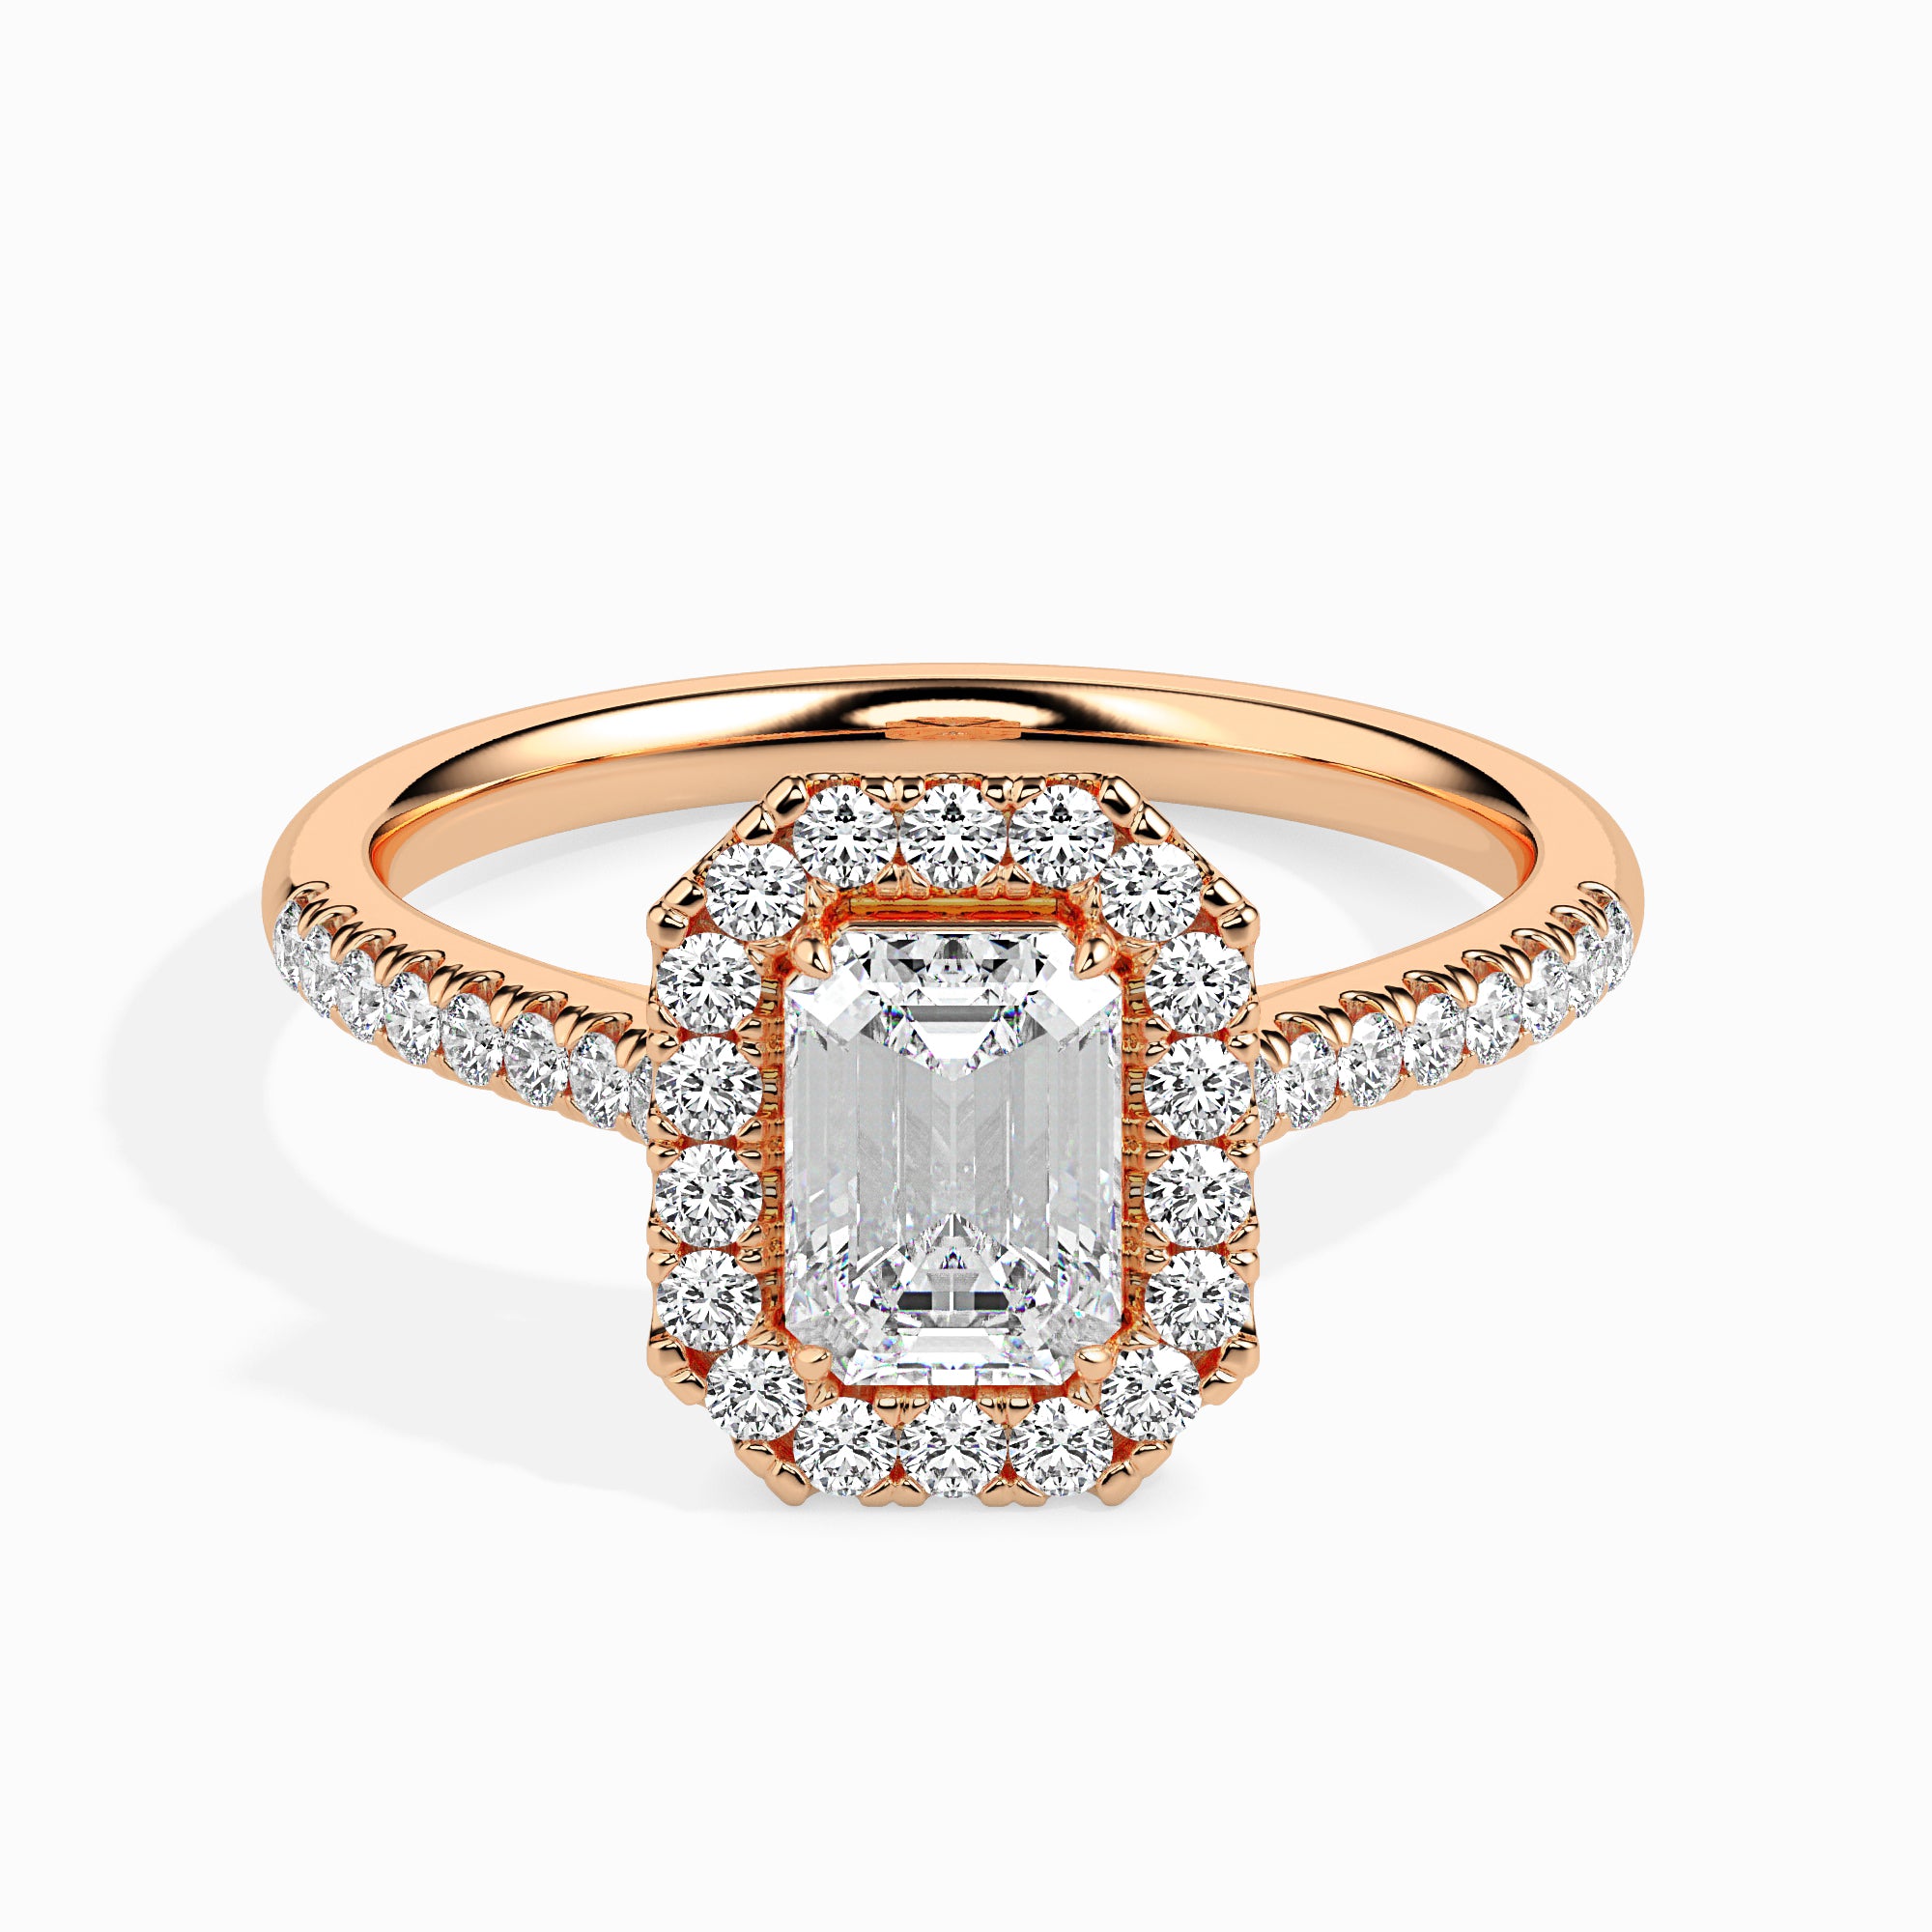 30-Pointer Emerald Cut Solitaire Halo Diamond Shank 18K Rose Gold Solitaire Ring JL AU 19035R